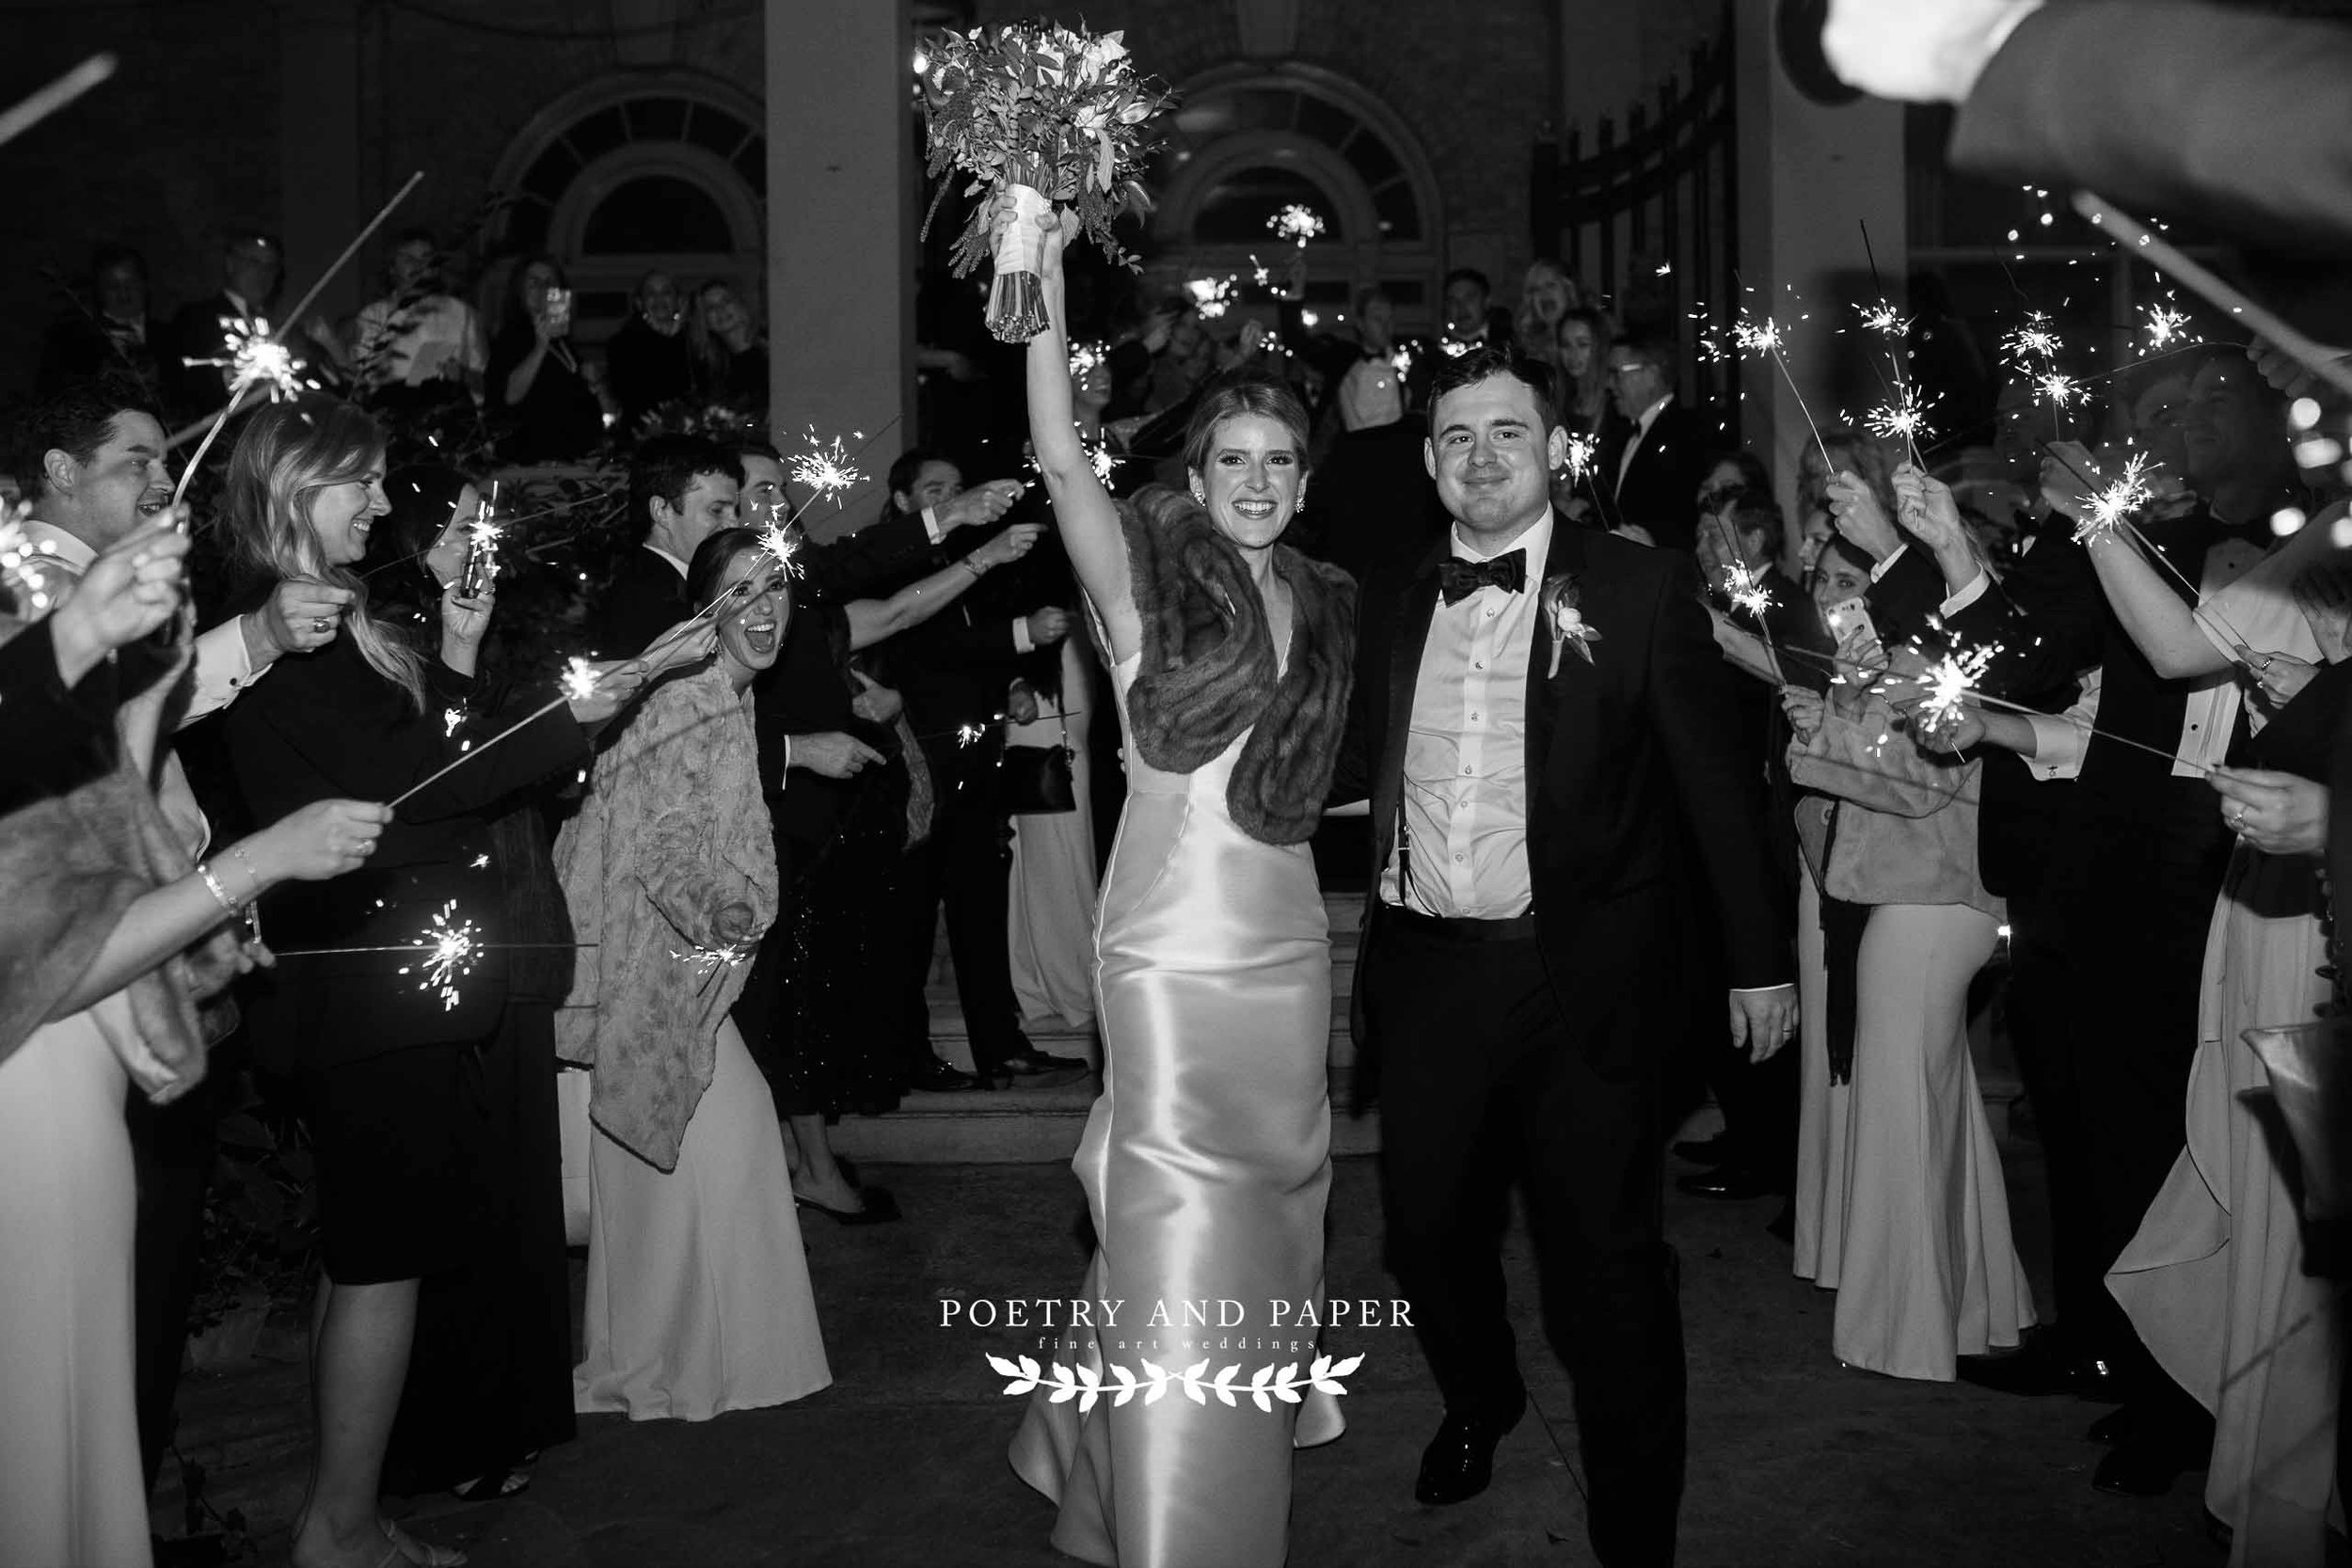 Capital City Club- Timeless wedding photography- Poetry and Paper- Dawn Johnson- black and white bride and groom sparklers.jpg